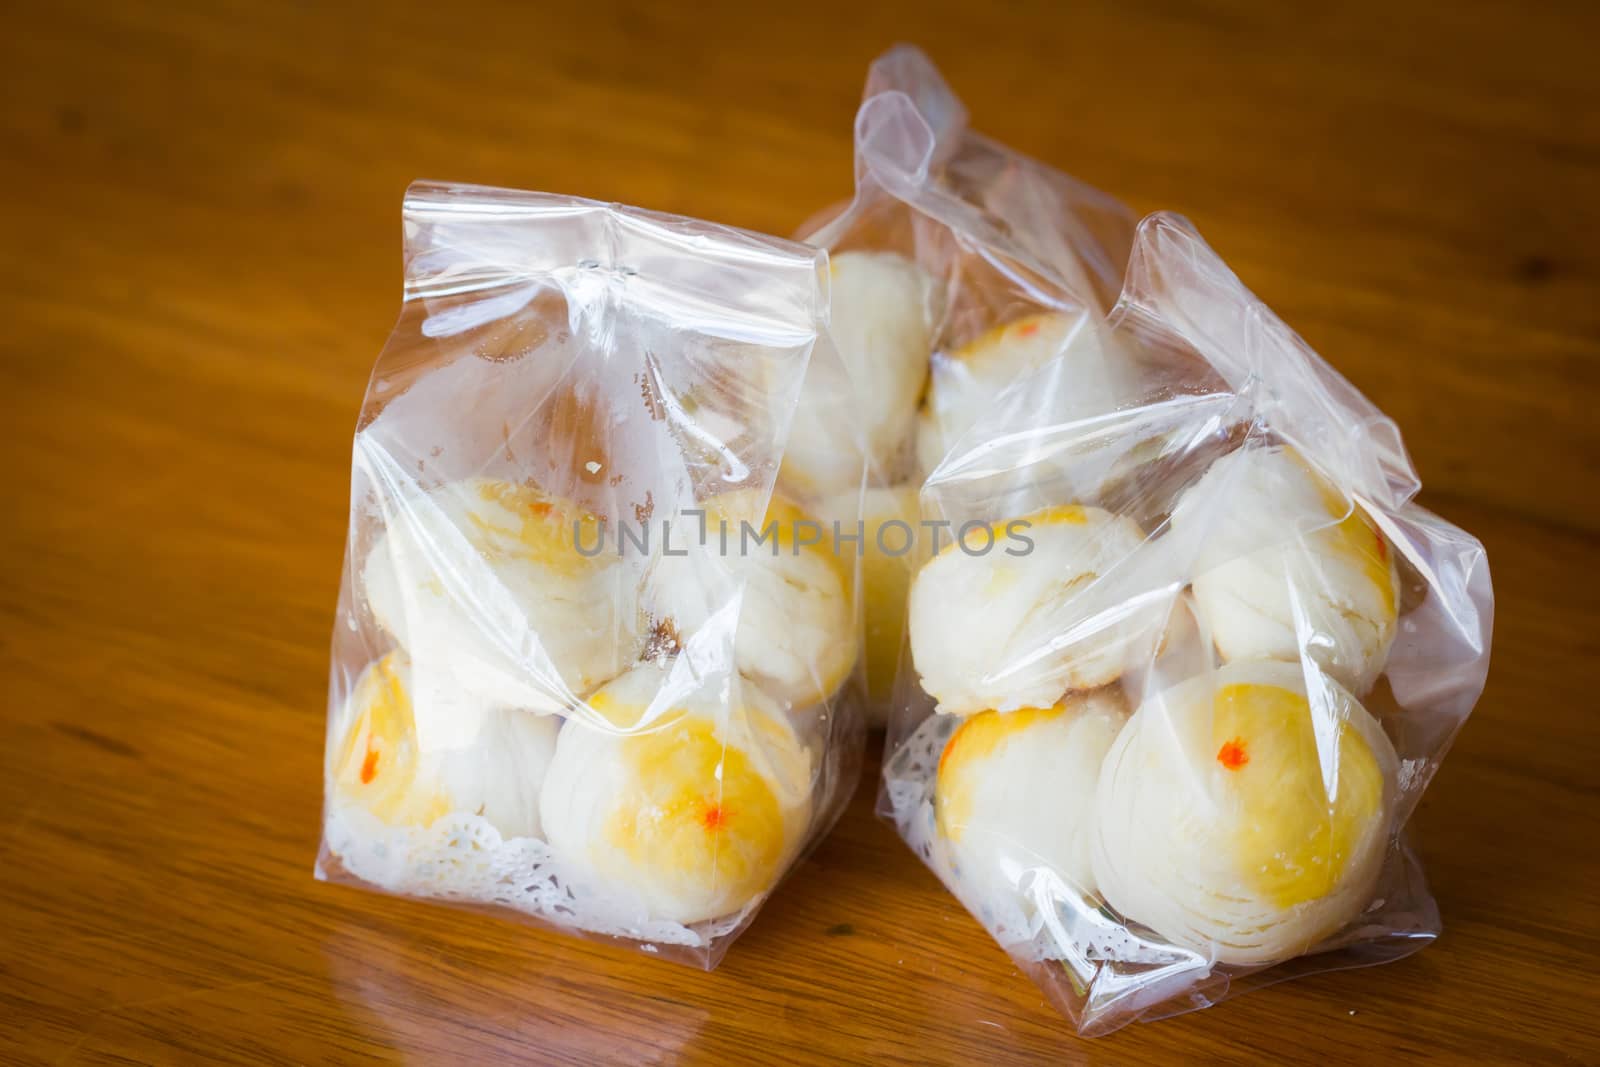 Traditional Chinese cake in plastic bag on wooden background